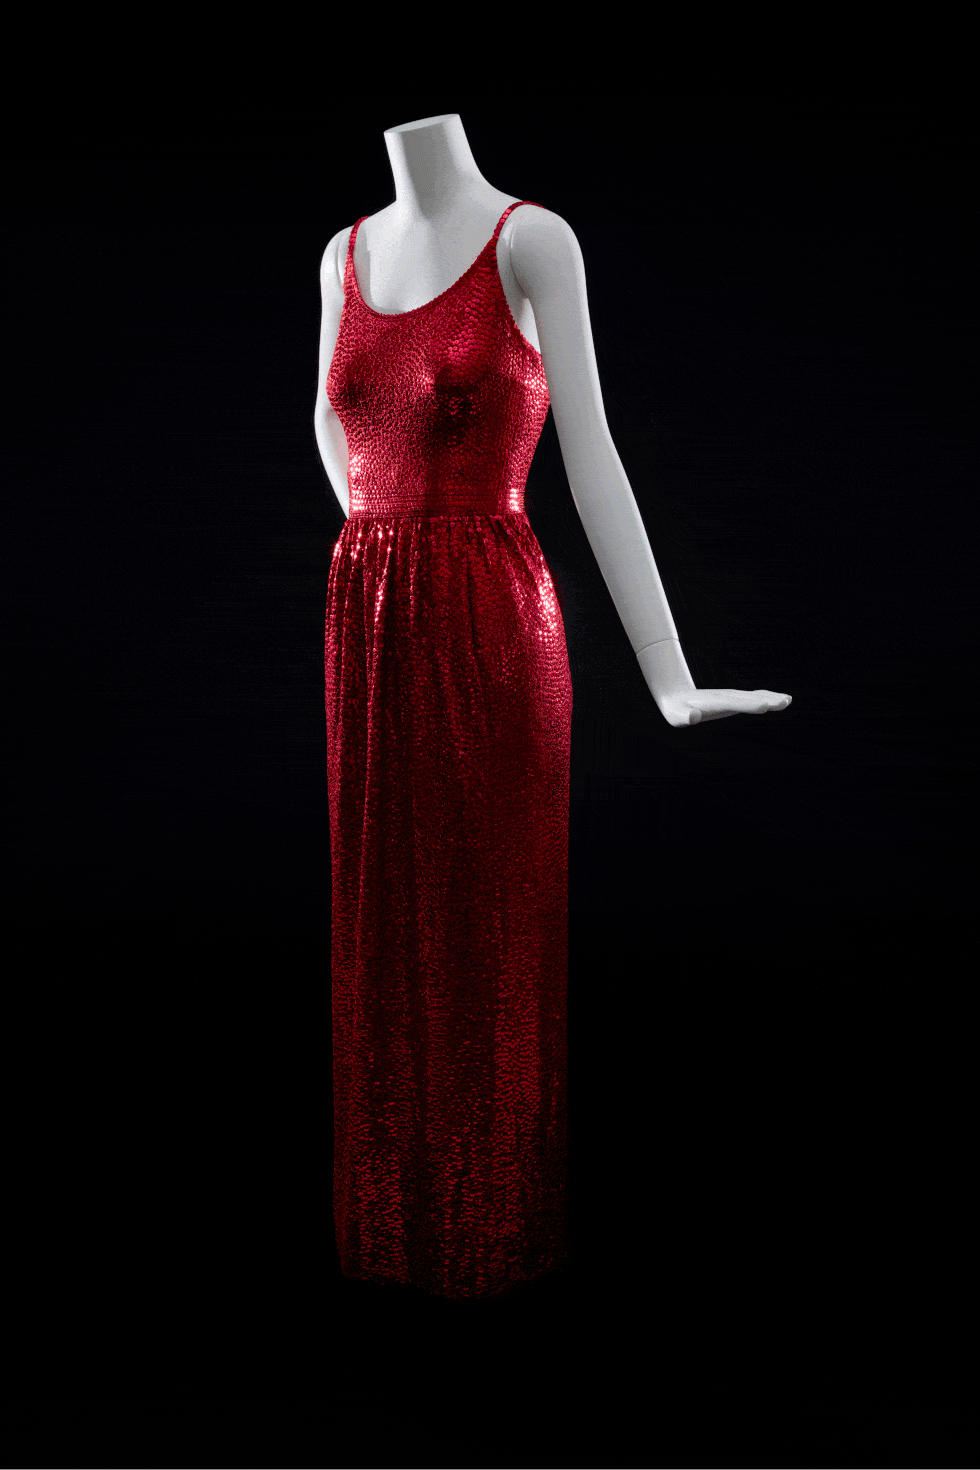 Clothing, Dress, Red, Cocktail dress, Day dress, Formal wear, Gown, Maroon, Fashion, Velvet, 